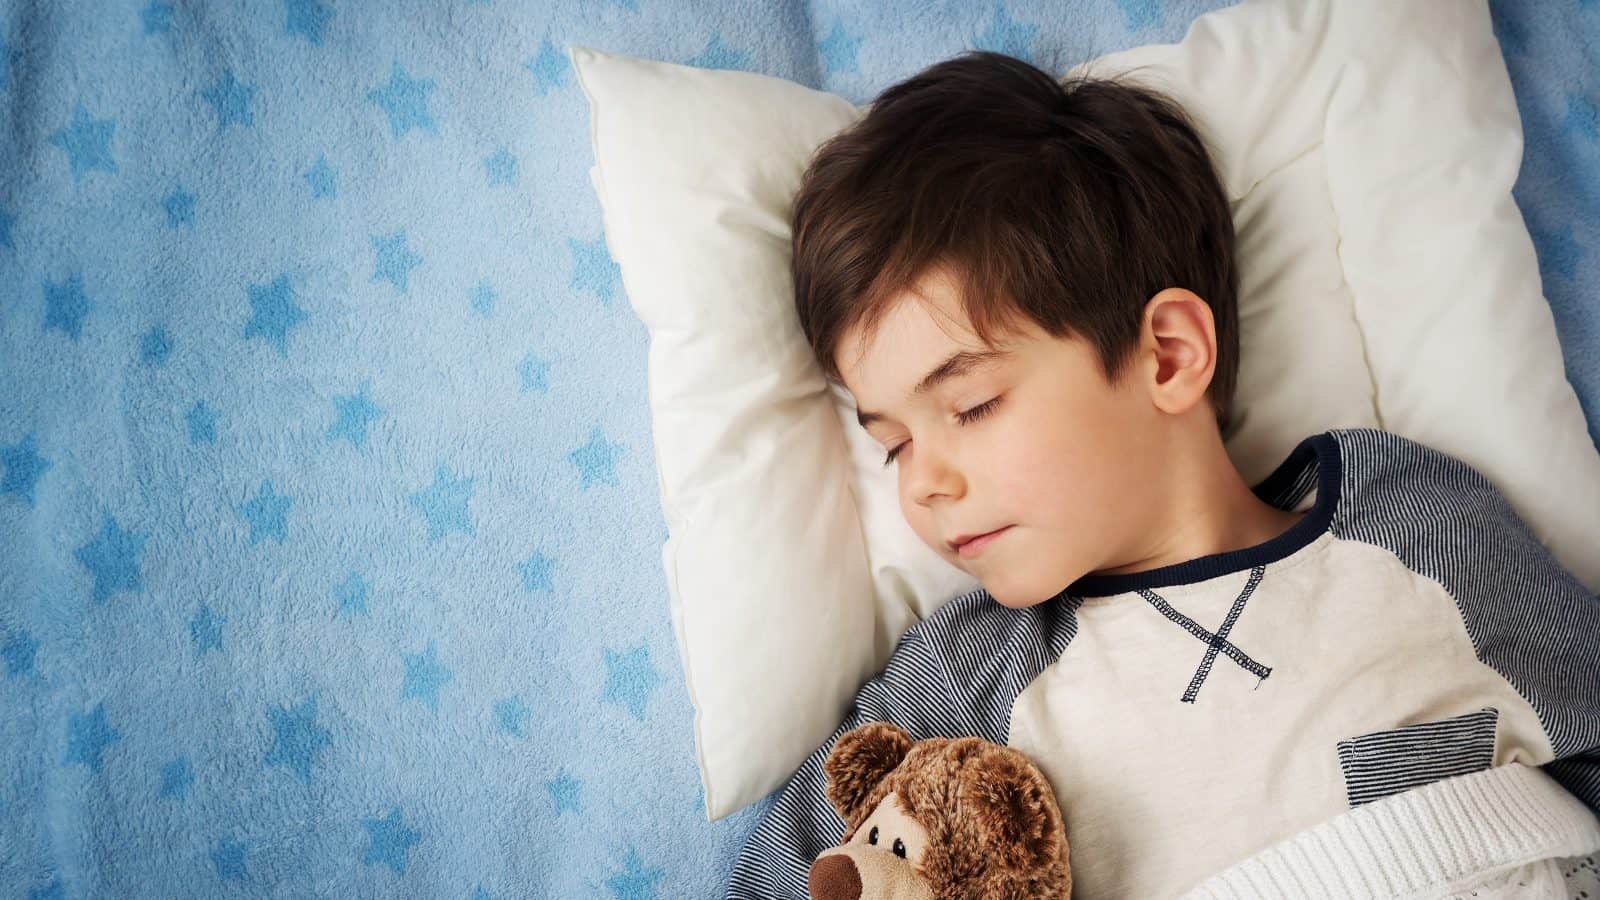 How to Stop Night Terrors of kid